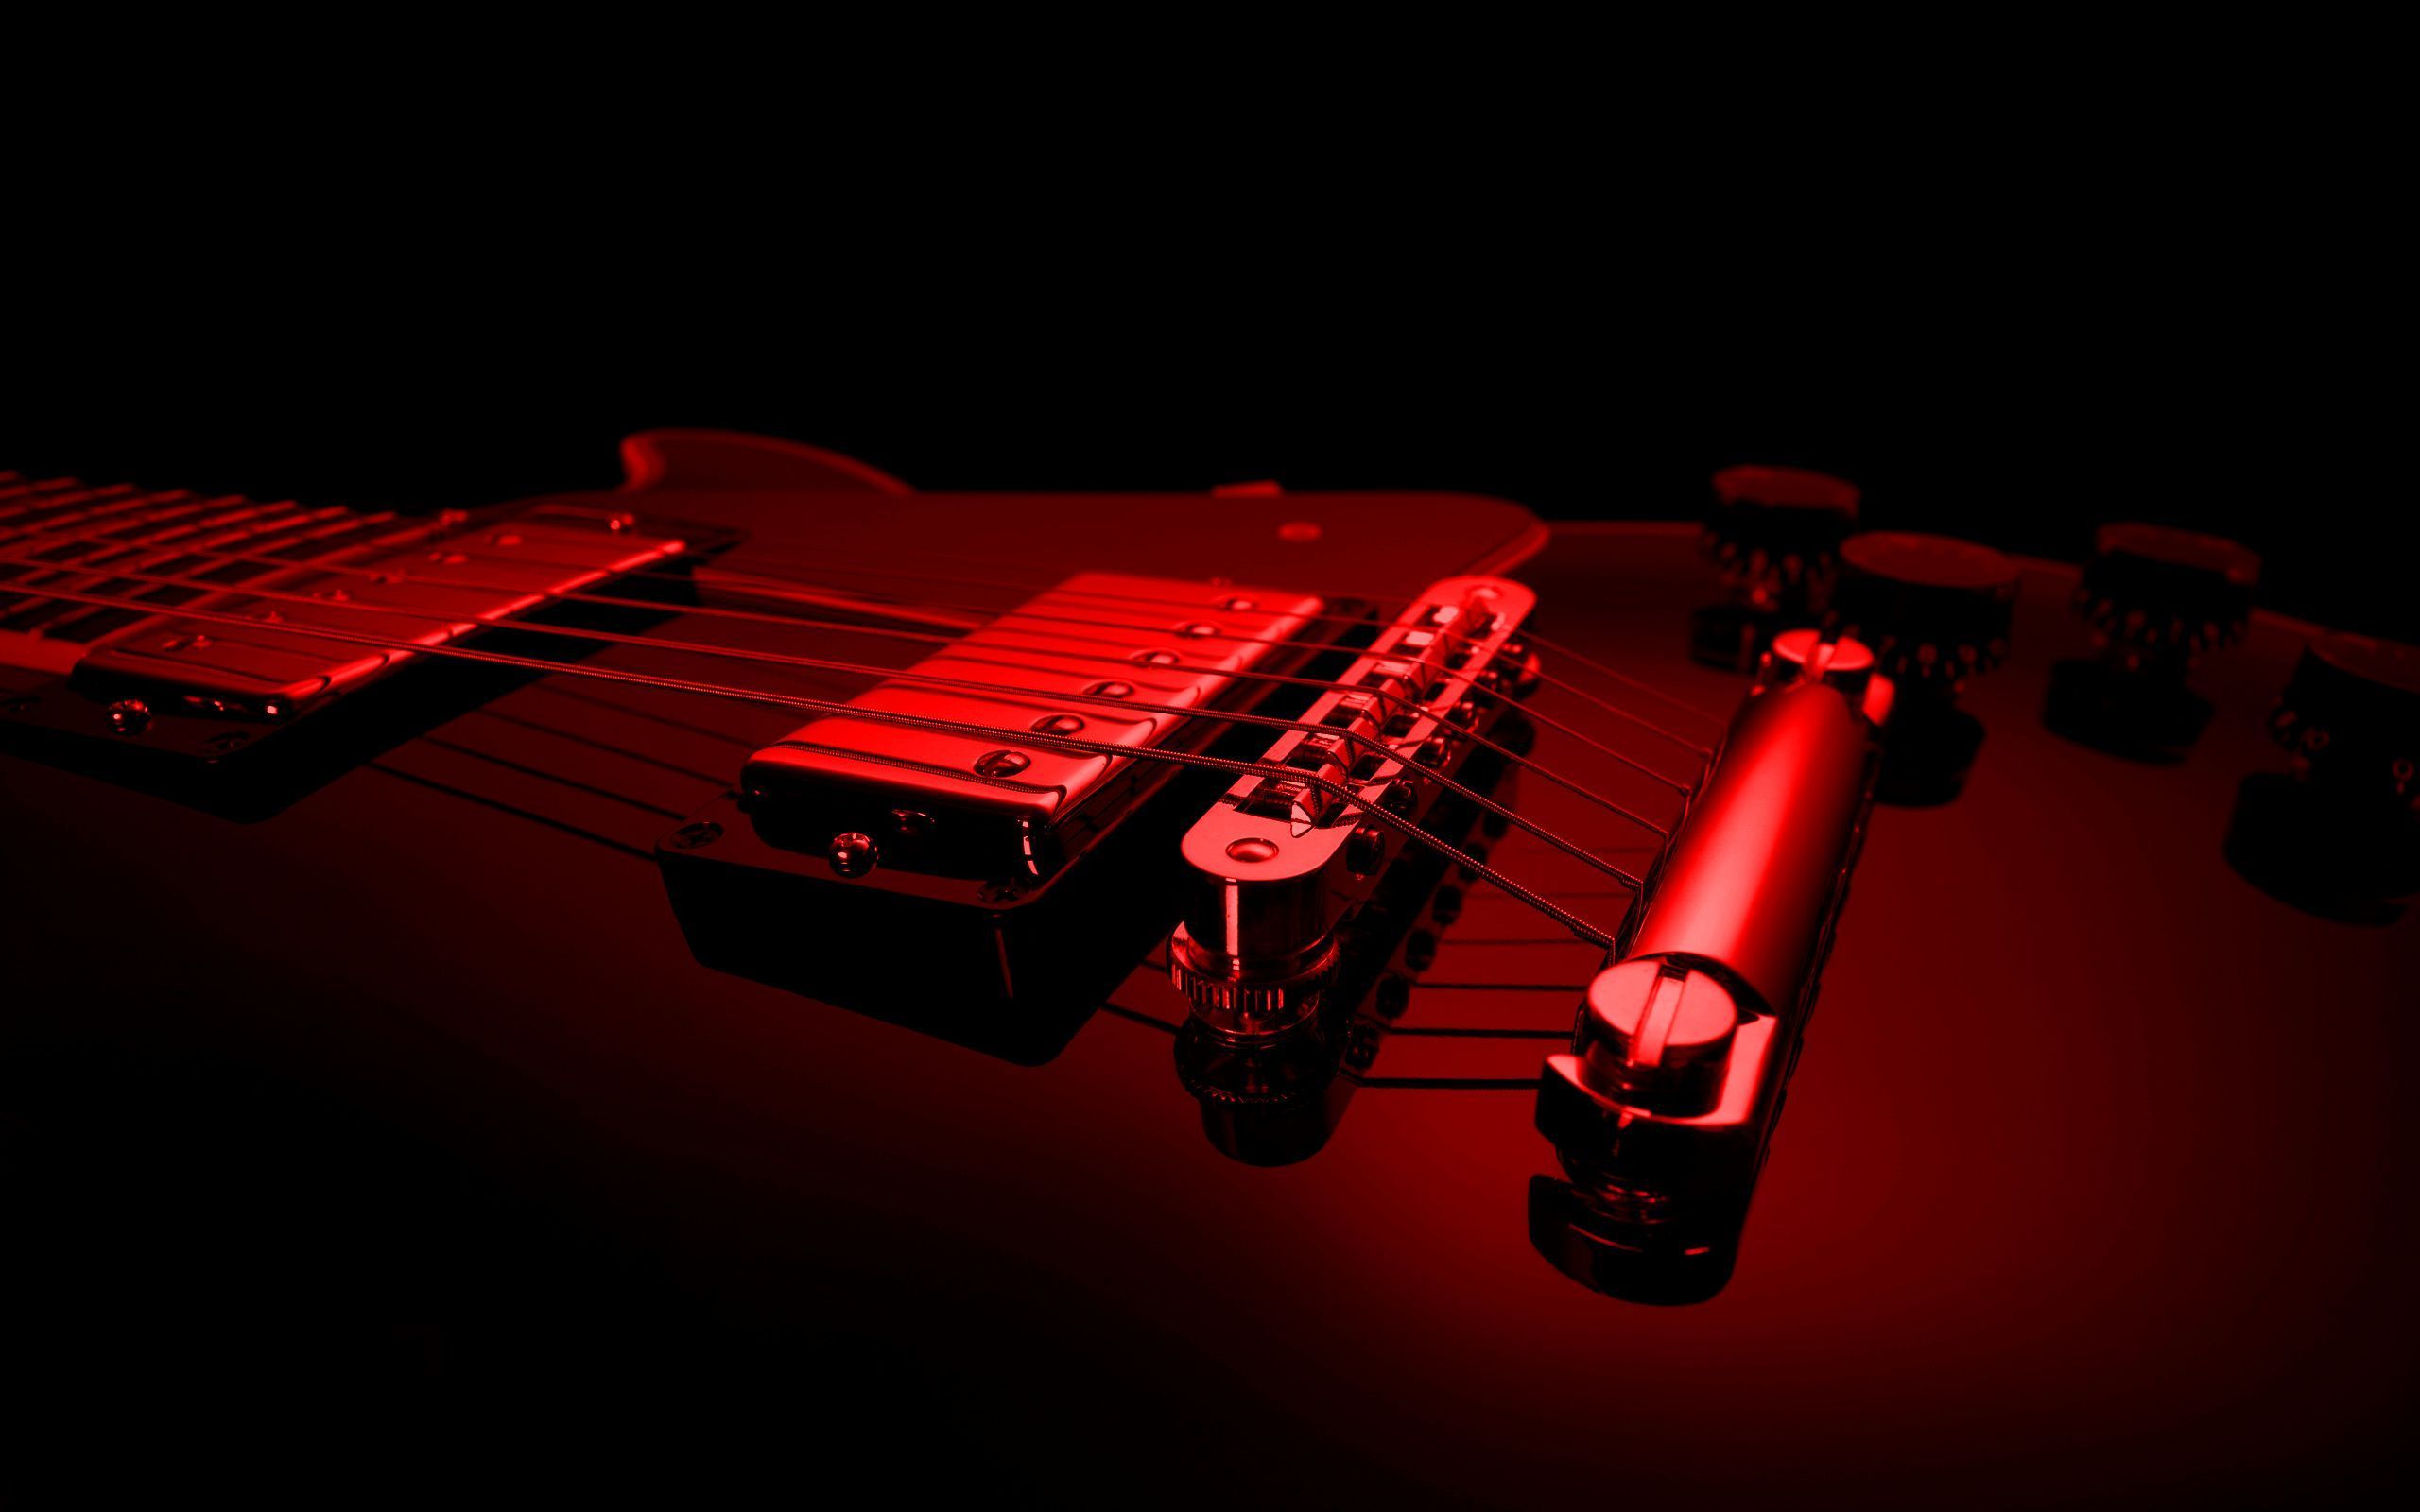 A red electric guitar on a black background - Guitar